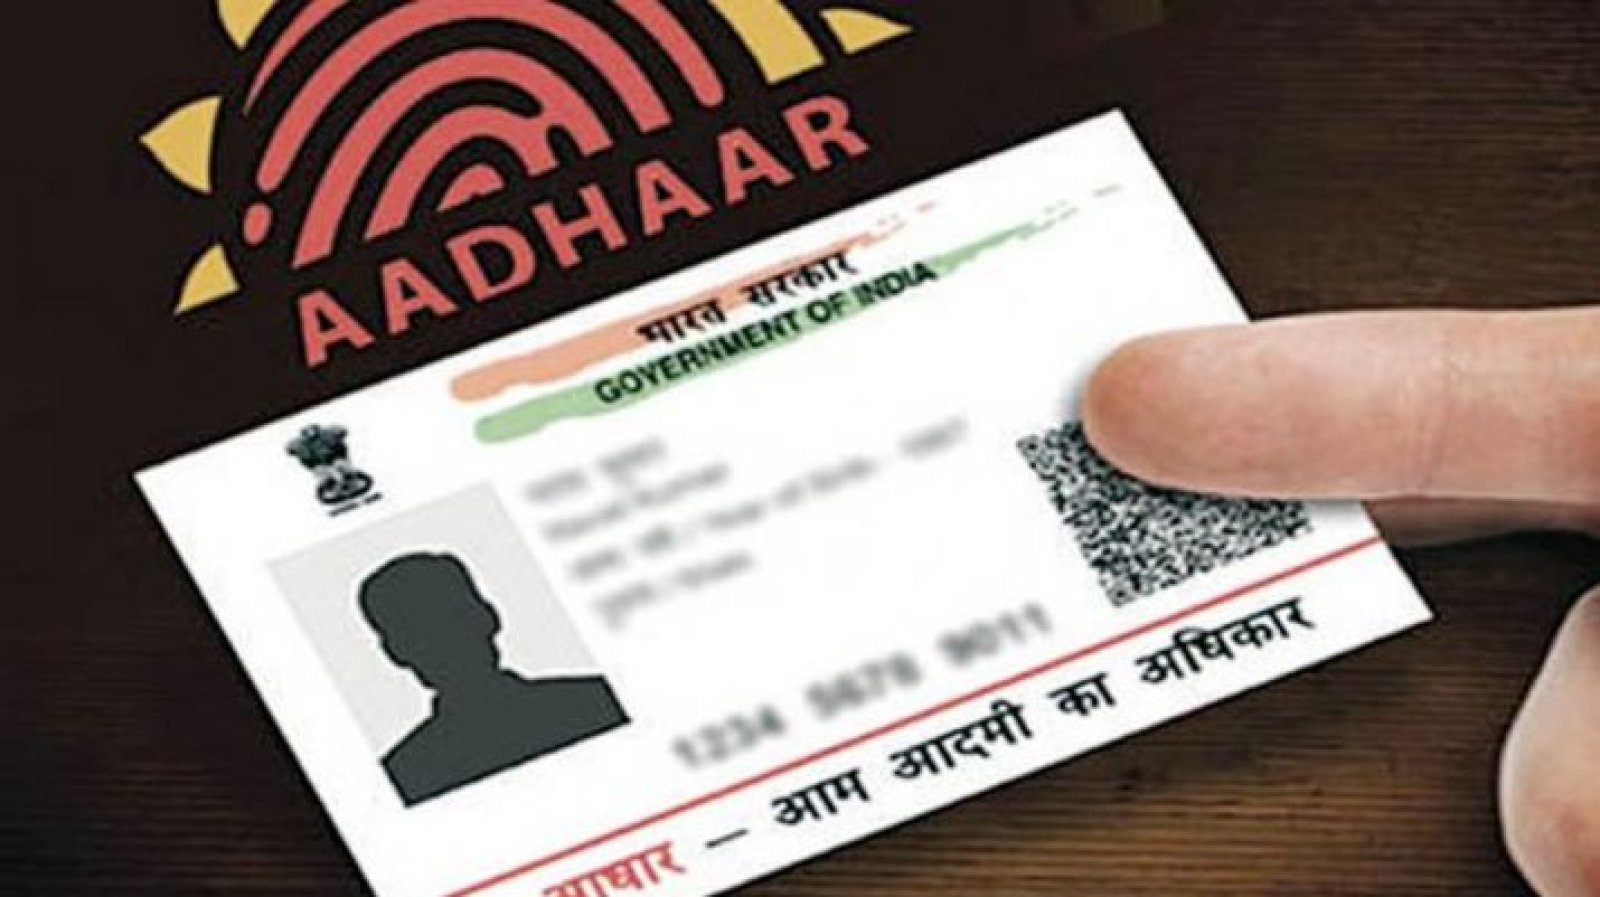 Attention Aadhaar card holders, you too can become a victim of digital fraud; Don't do this even by mistake